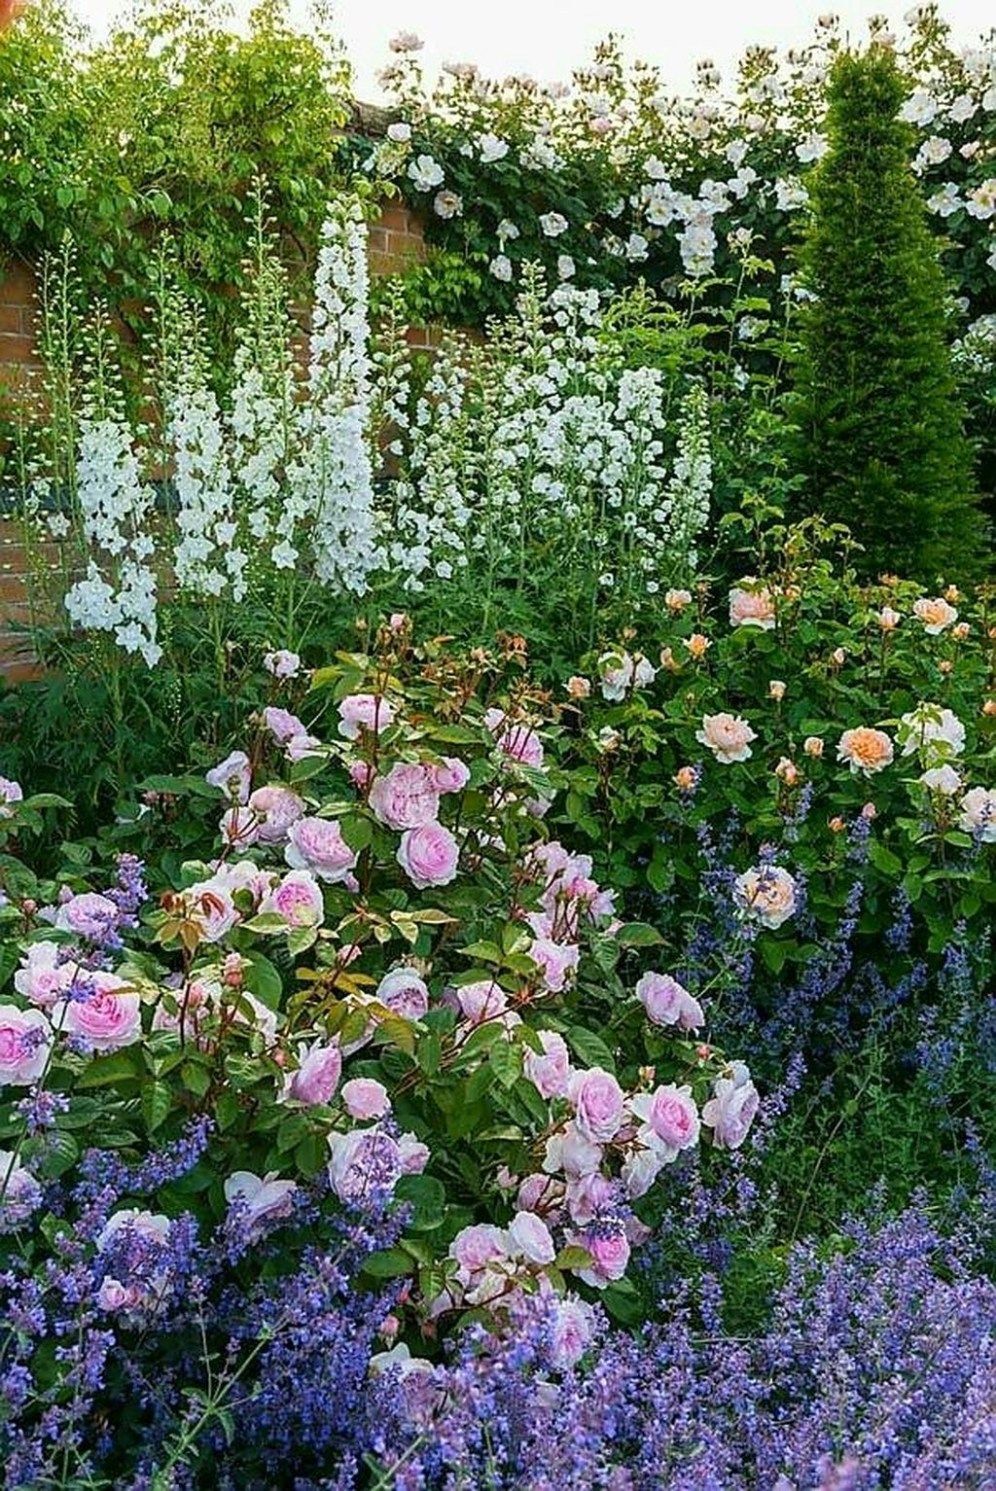 Inspiring Planting Combination Ideas For Your Garden 25 -   16 planting to get ideas